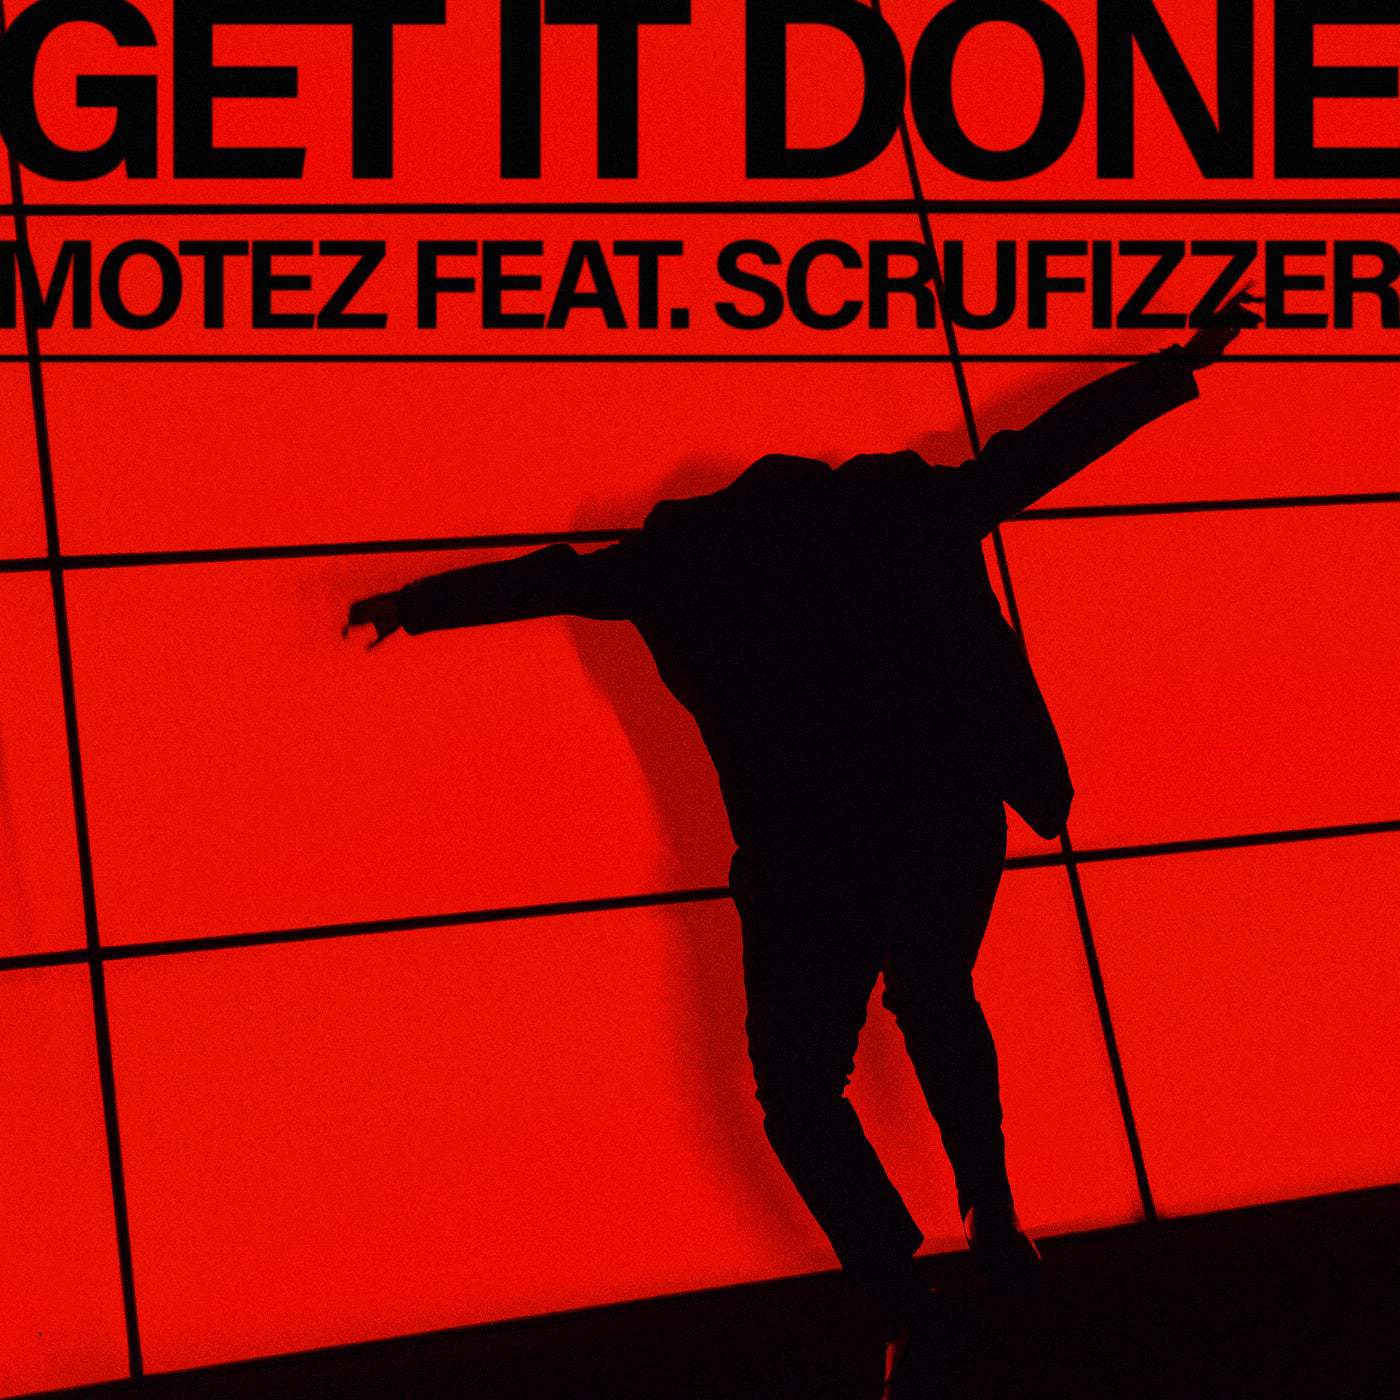 Download Motez, Scrufizzer - Get It Done (feat. Scrufizzer) [Extended Mix] on Electrobuzz